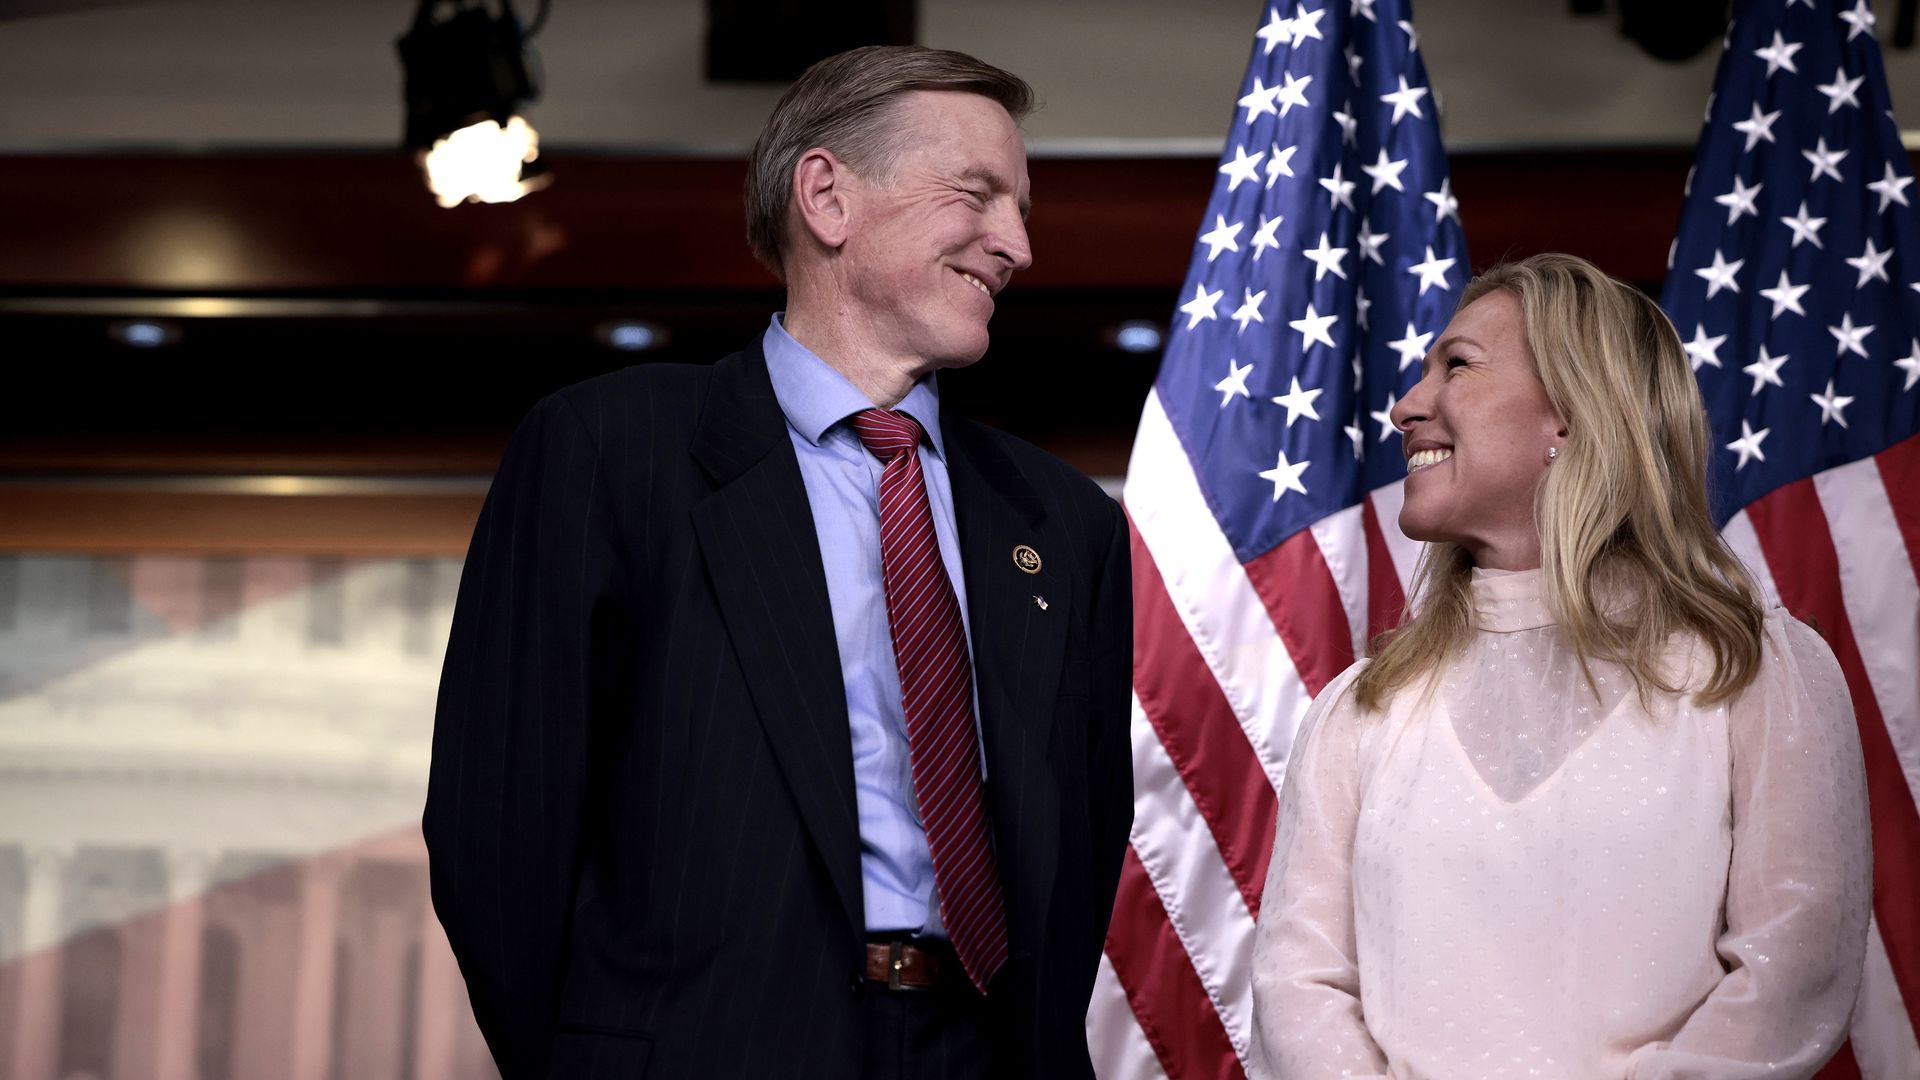 Rep. Marjorie Taylor Greene (R-GA) smiles at Rep. Paul Gosar (R-AZ) during a news conference at the U.S. Capitol Building on December 07, 2021